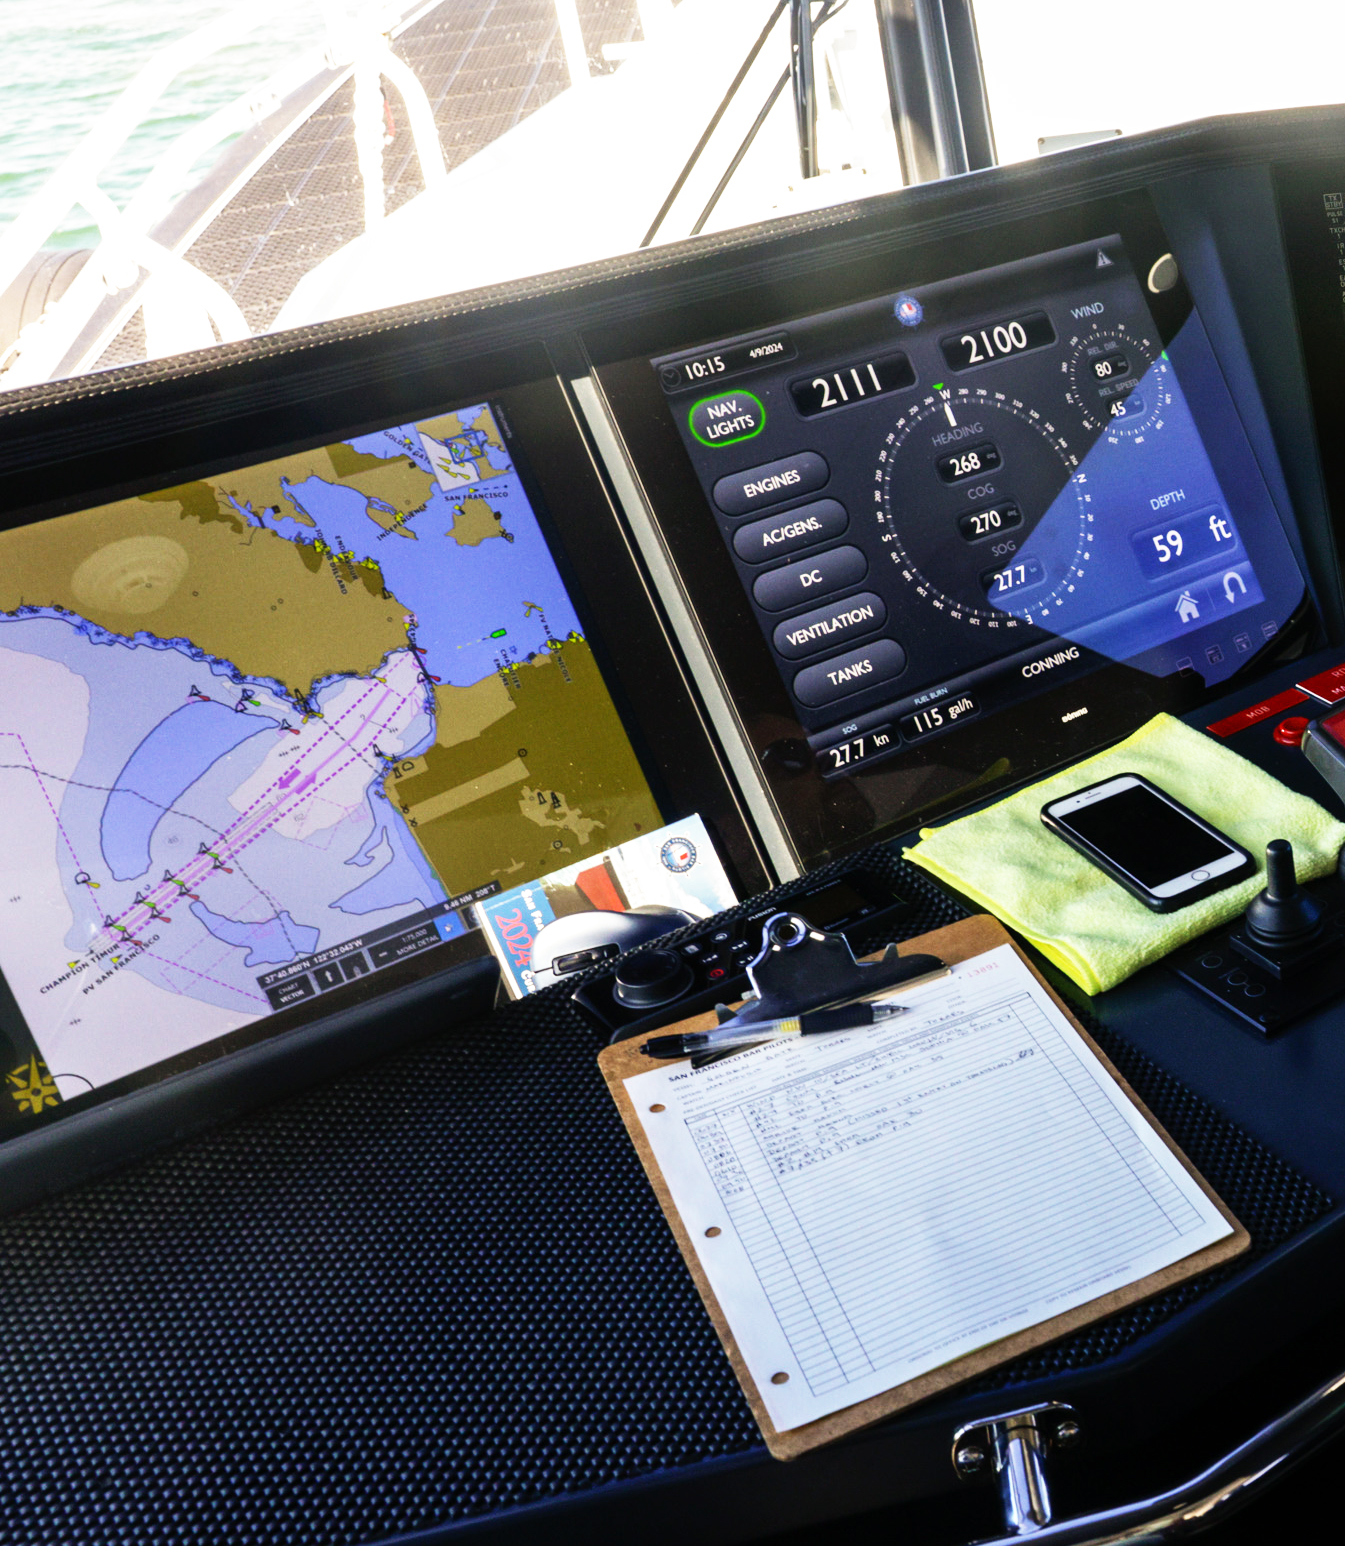 Boat navigation screens, a clipboard, and controls on a dashboard, with the ocean visible through a window.